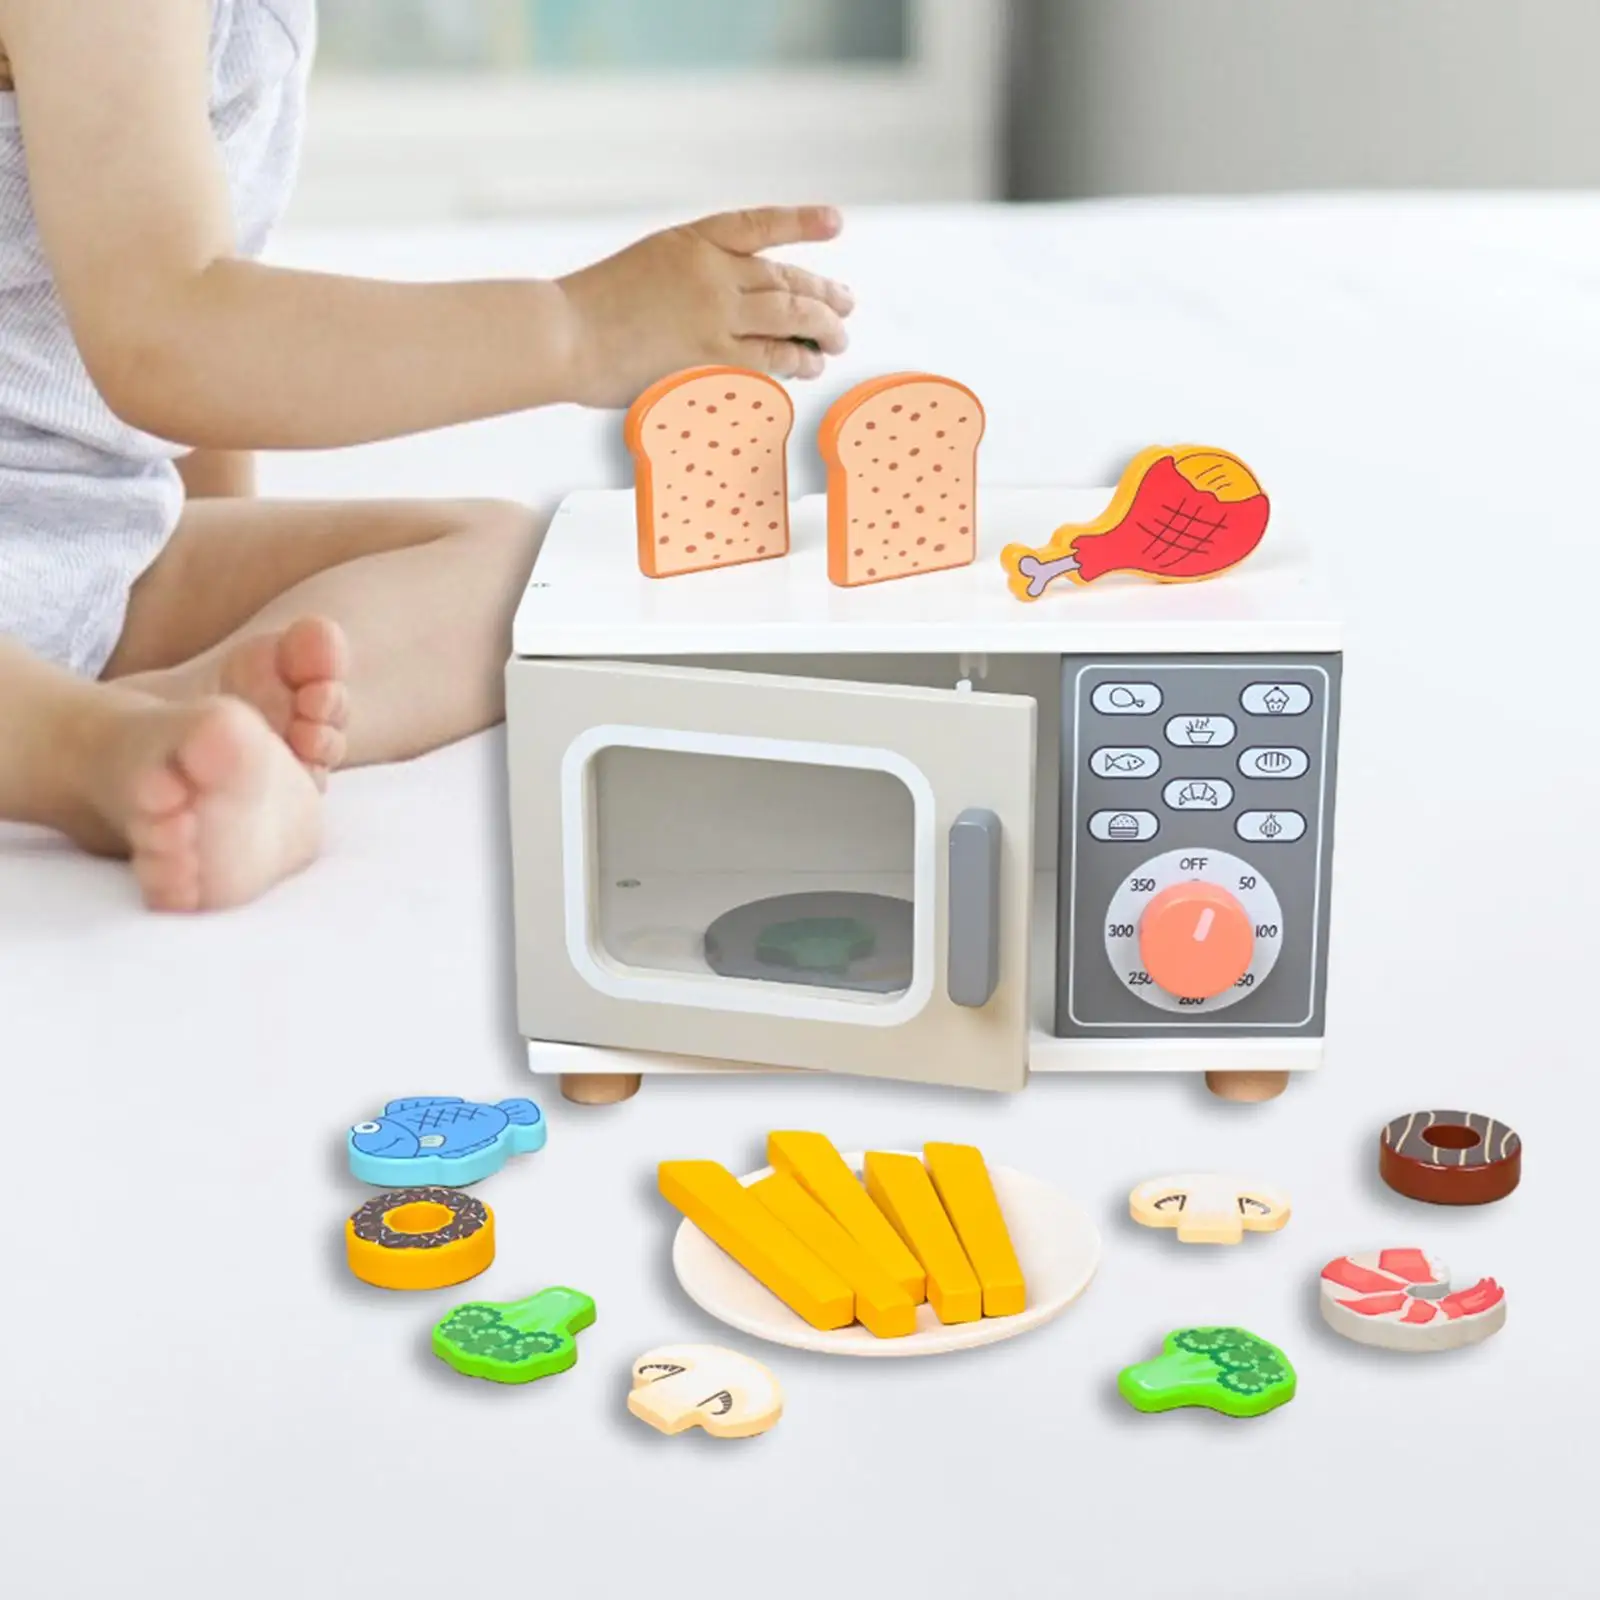 

Kids Microwave Oven Toys Realistic Toy Kitchen Appliances Playing with Food and Kitchen Toys for 3-8 Year Old Children Kids